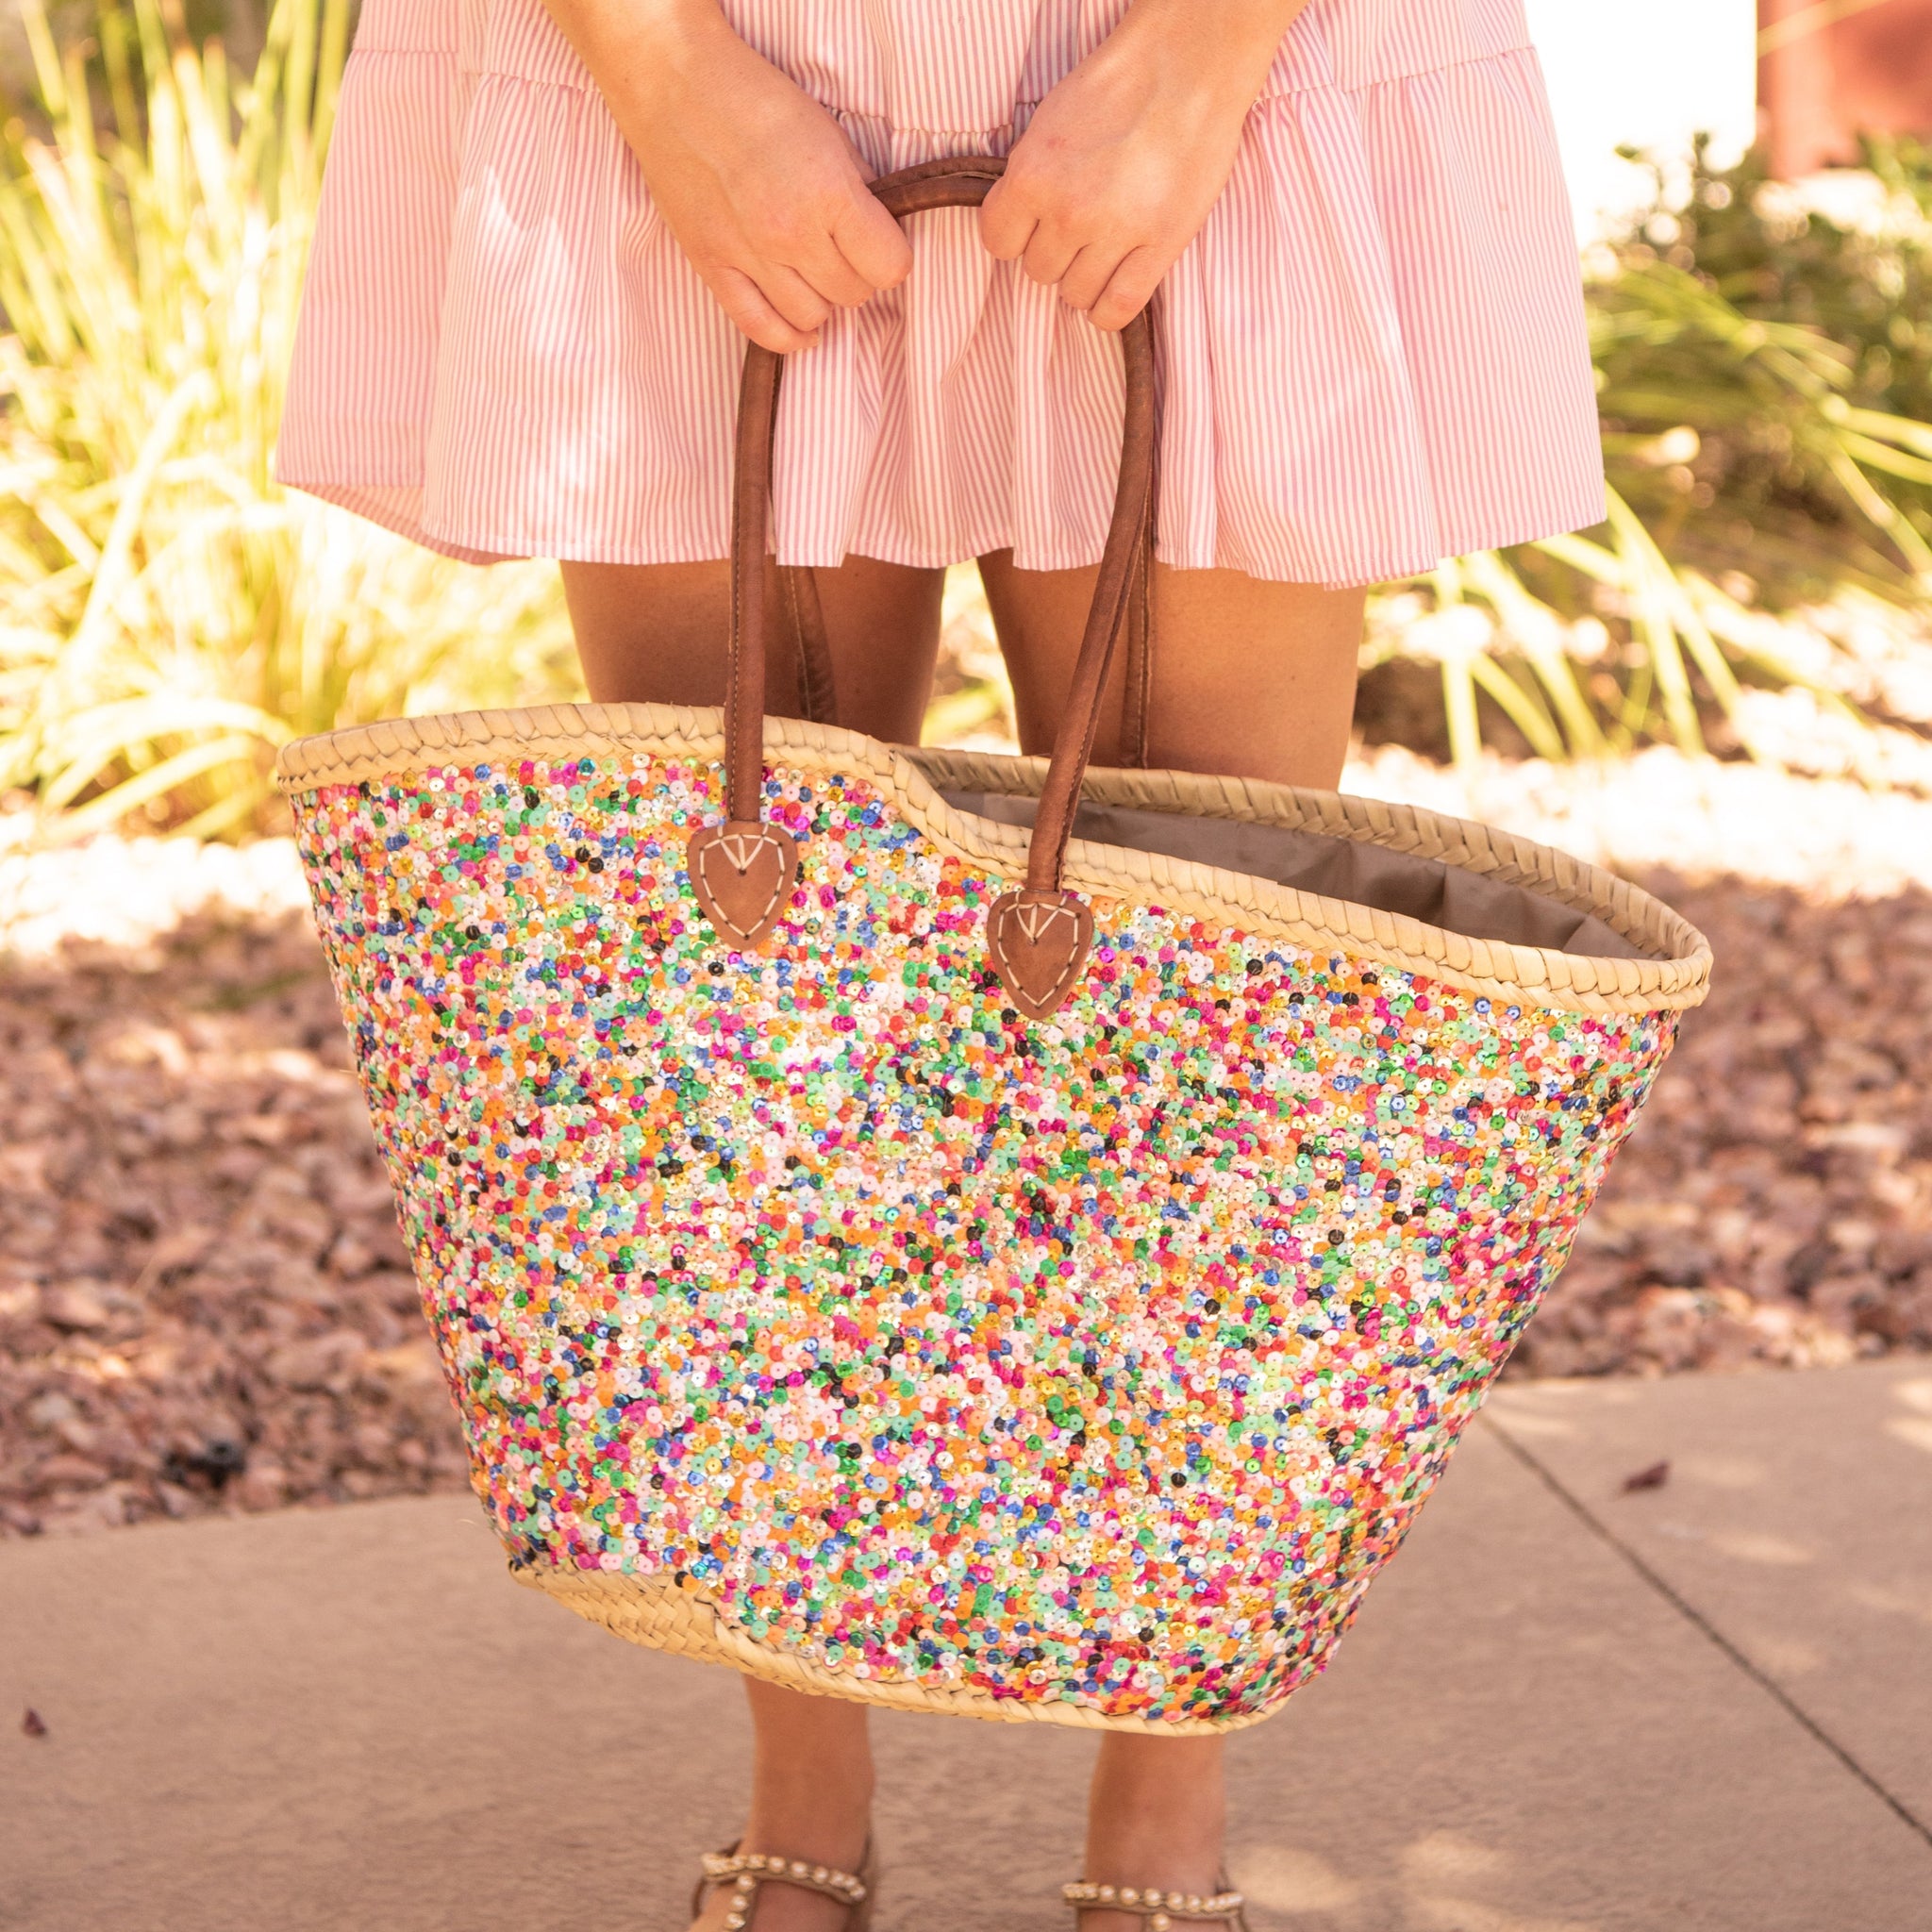 Girl holding Large Straw Shoulder Bag with Multi-Colored Sequins